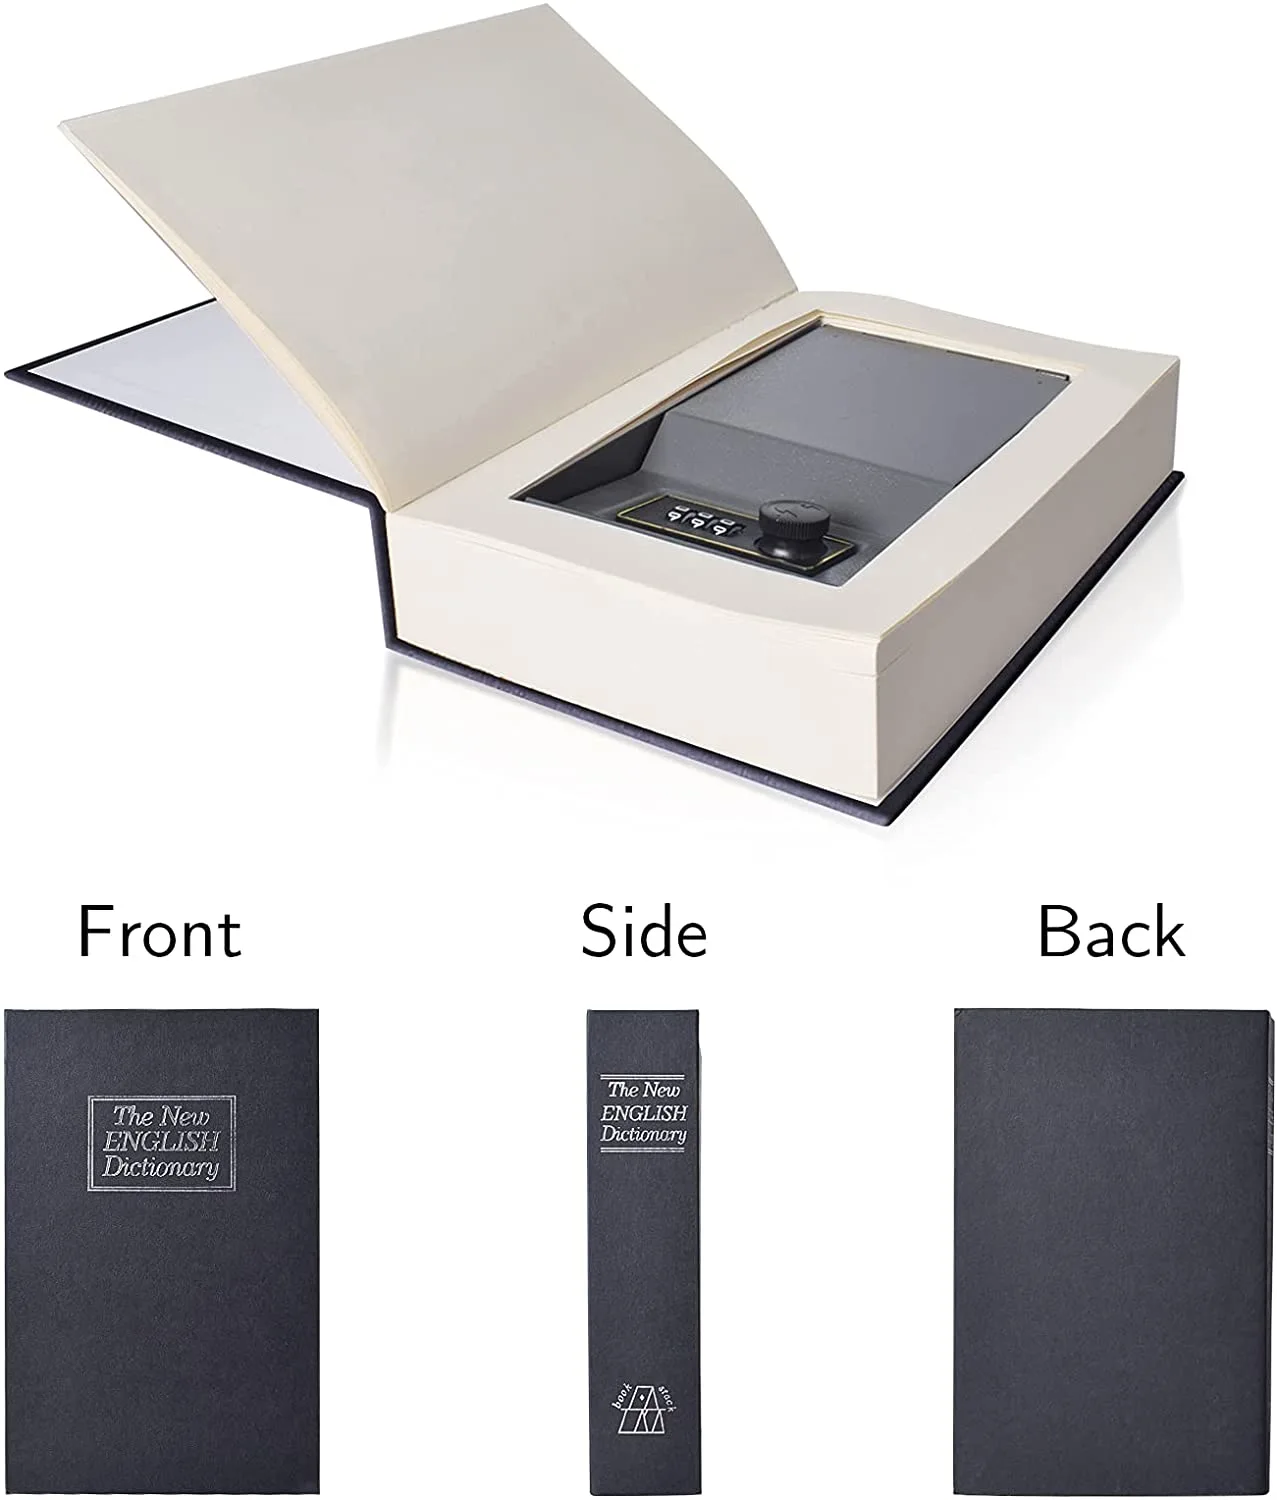 Real Page Hidden Book Safes with Combination lock, Diversion Dictionary Mini Lock Box B22C-RP